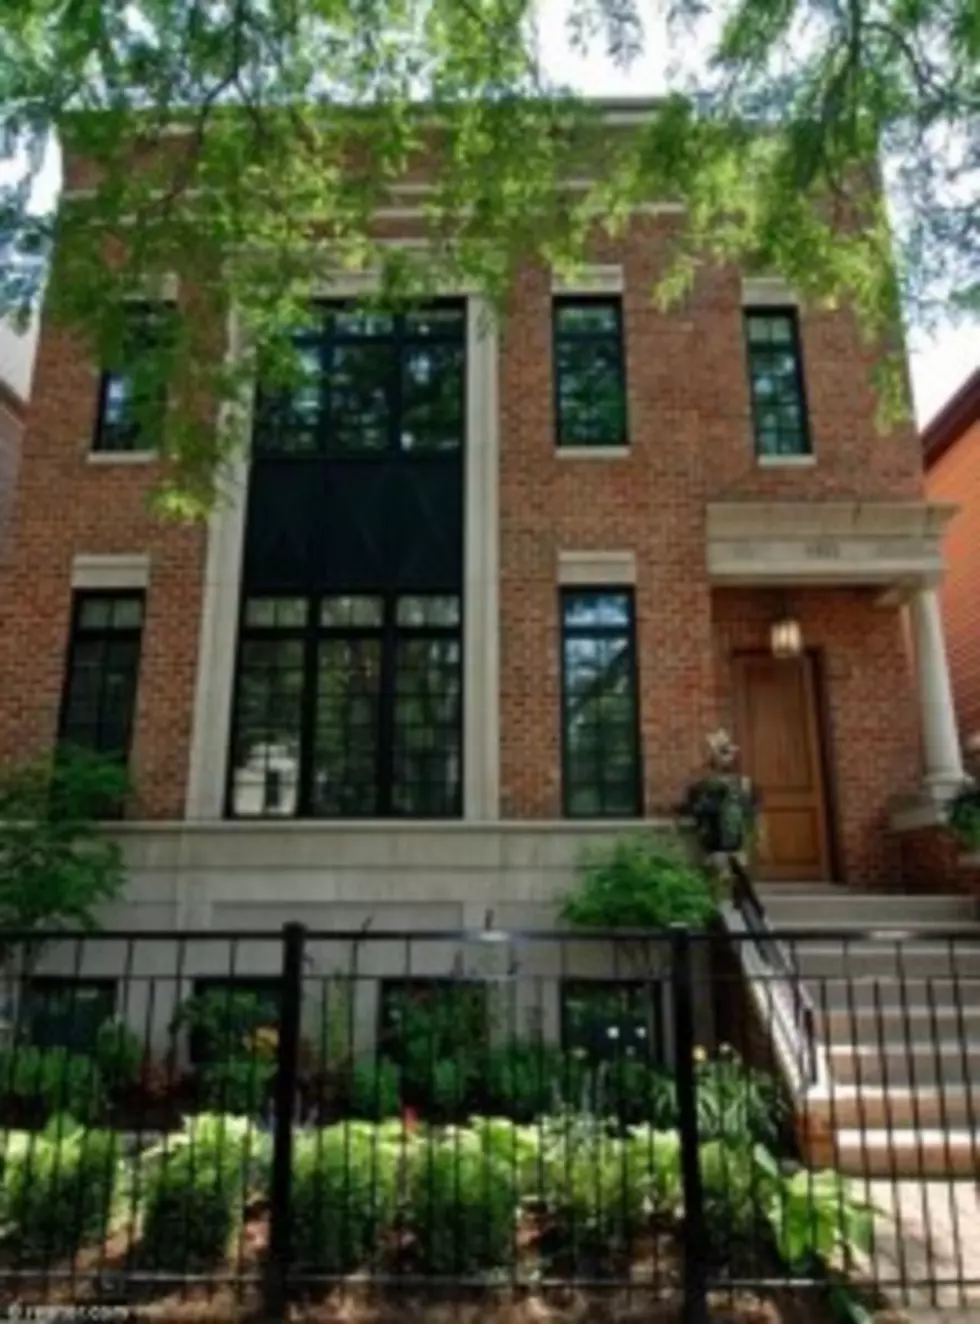 Rosie’s Chicago Home Sells In 1 Day [PHOTOS]